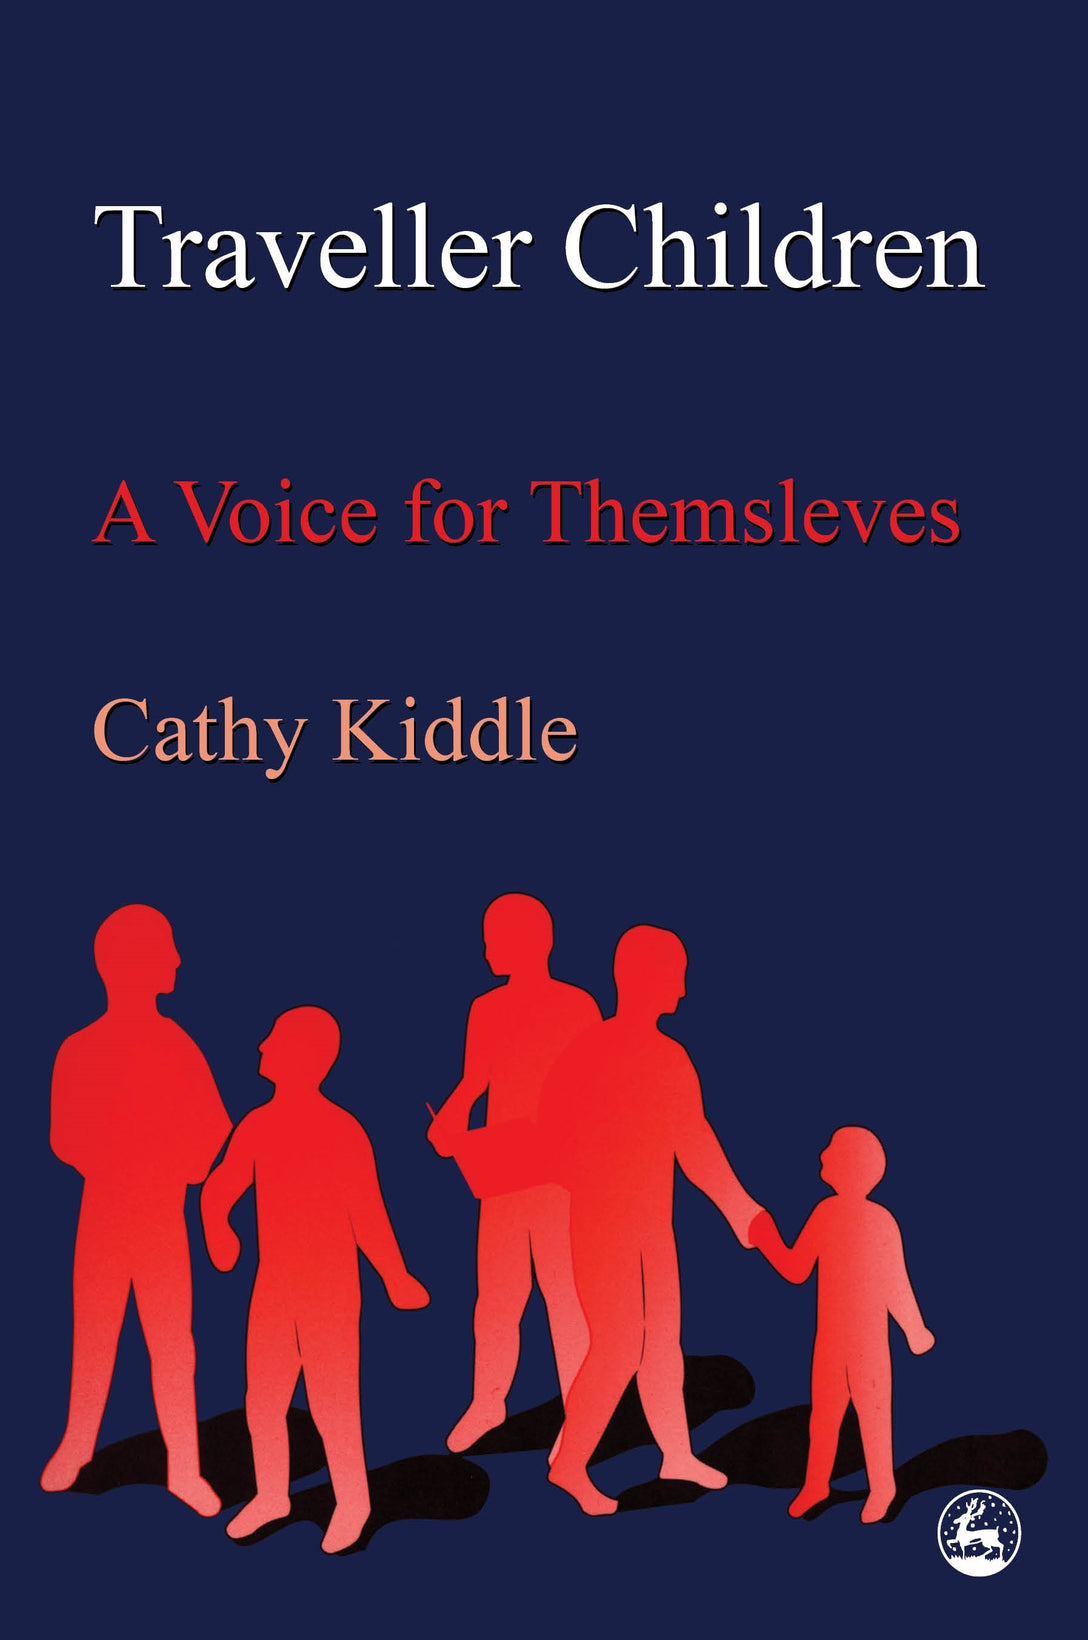 Traveller Children by Cathy Kiddle